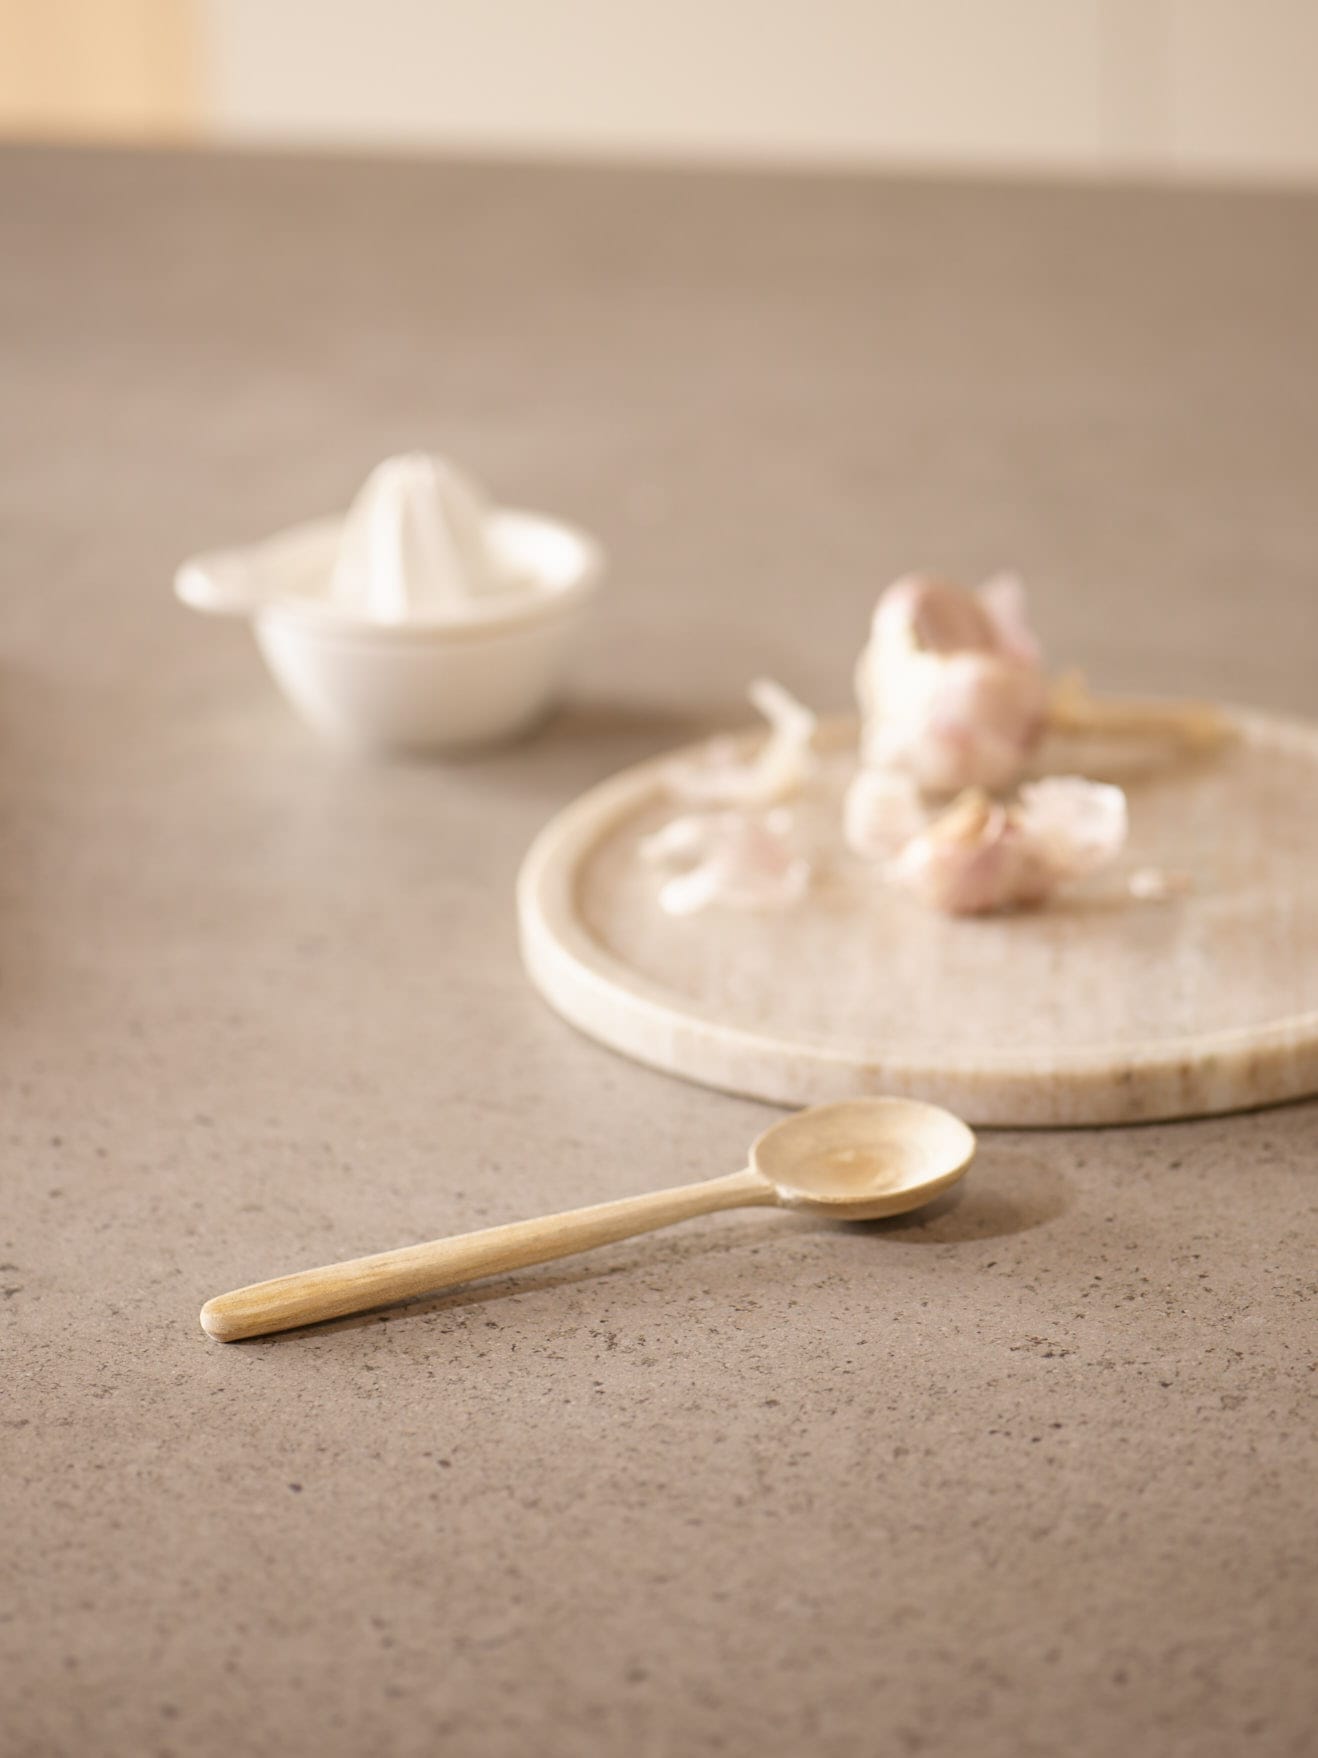 Spoon and plate with garlic on a worktop